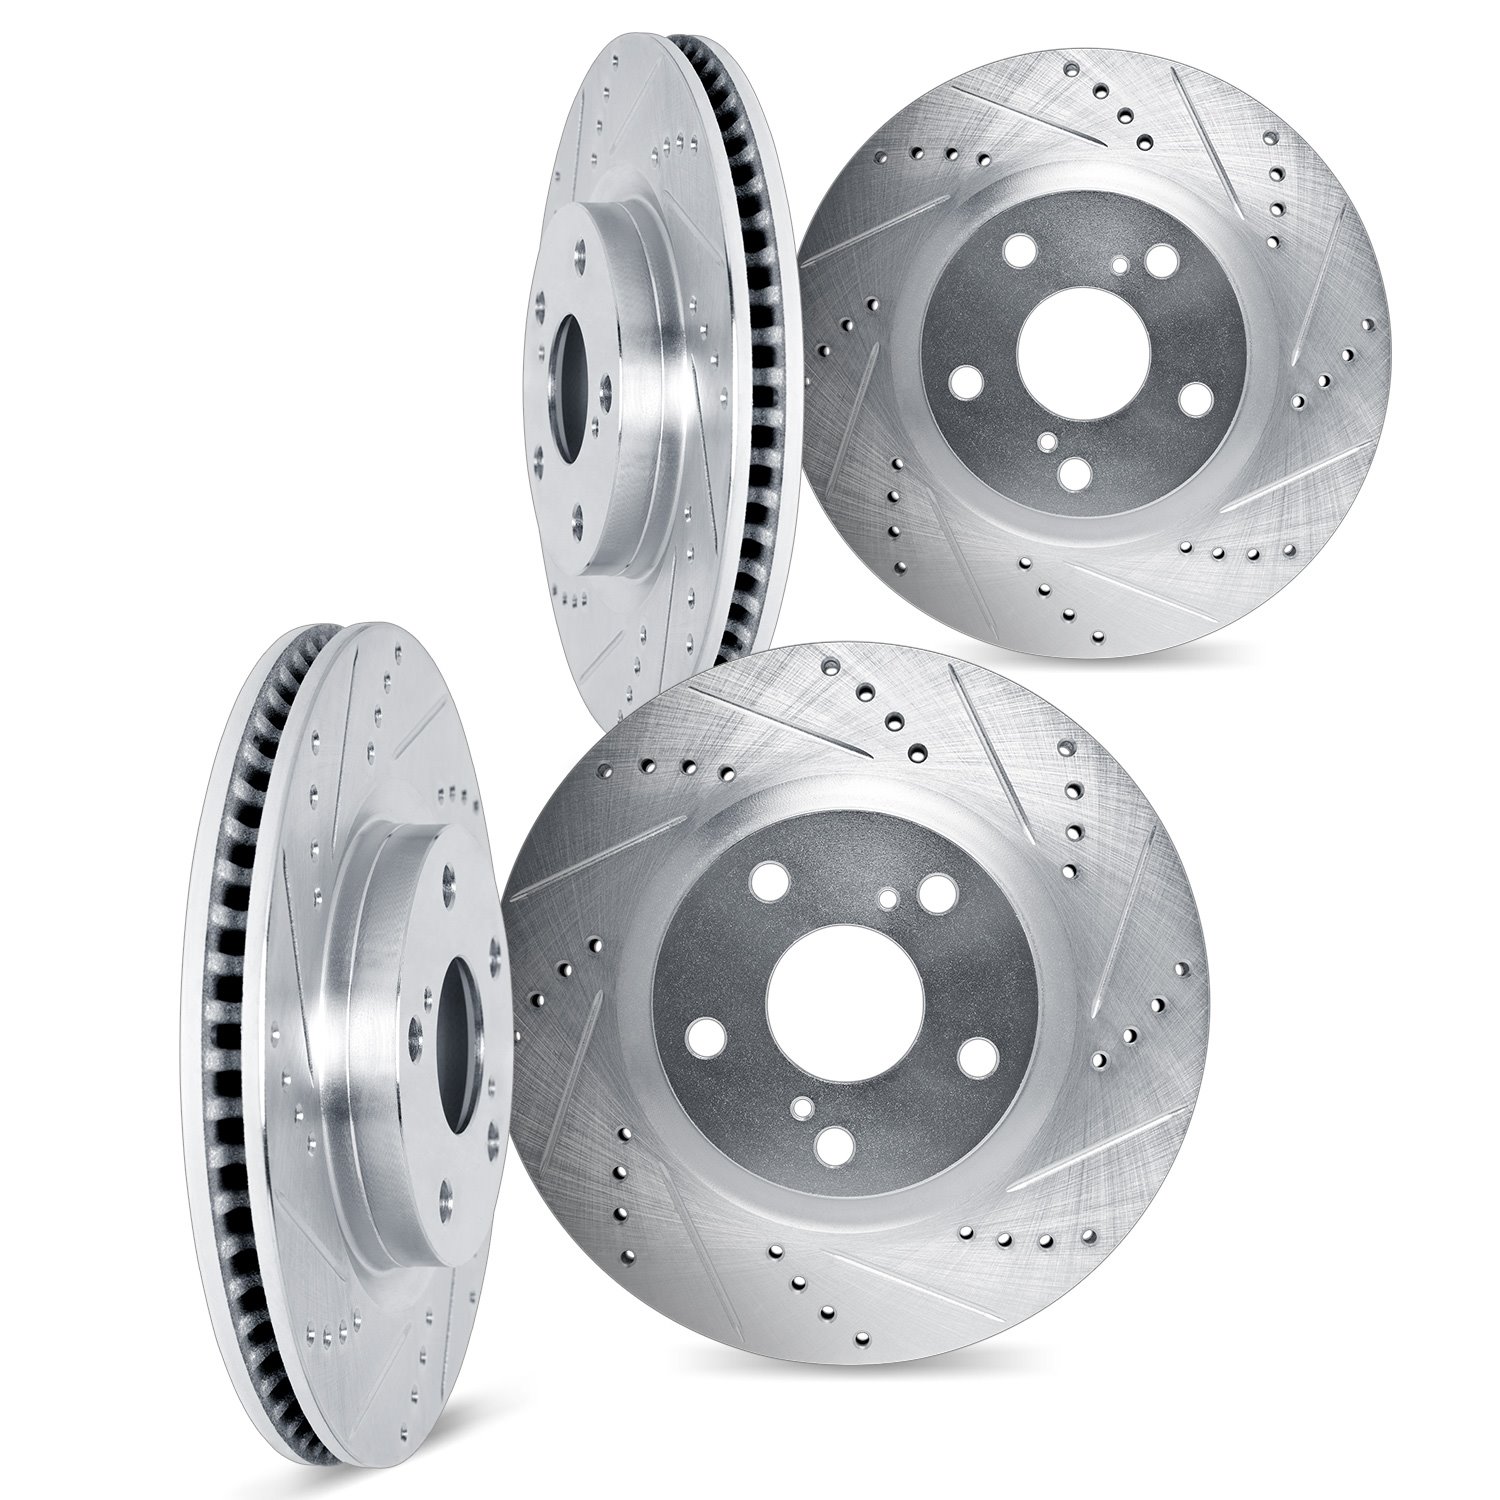 7004-75028 Drilled/Slotted Brake Rotors [Silver], Fits Select Lexus/Toyota/Scion, Position: Front and Rear